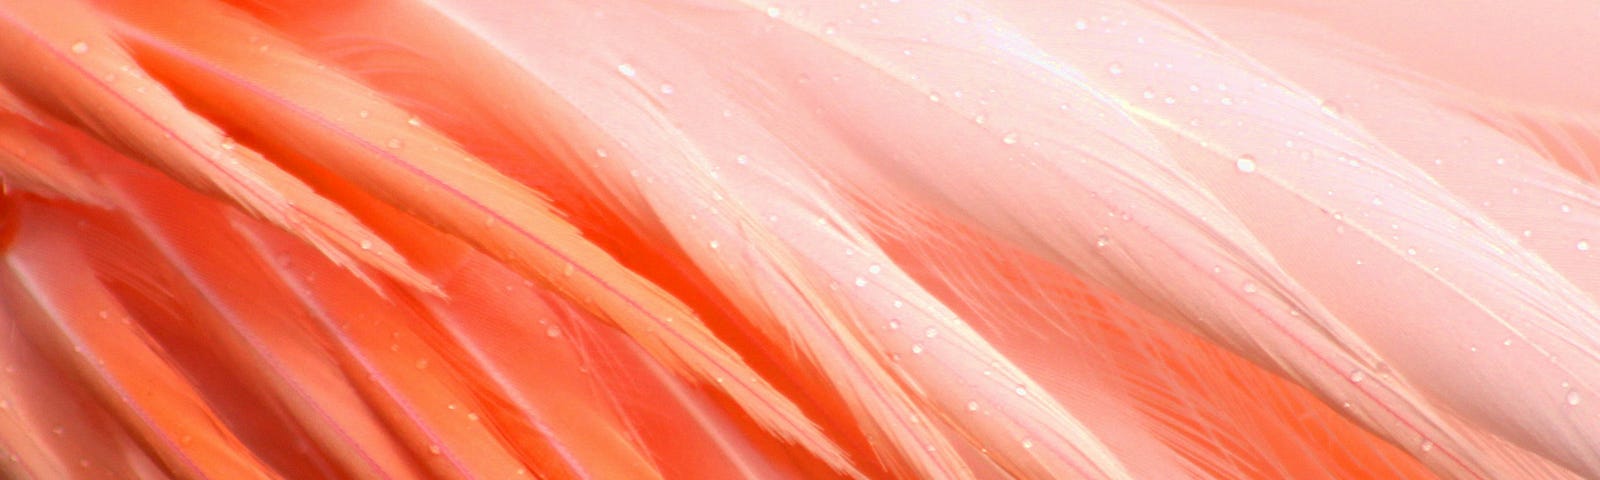 Pink feathers with beads of water